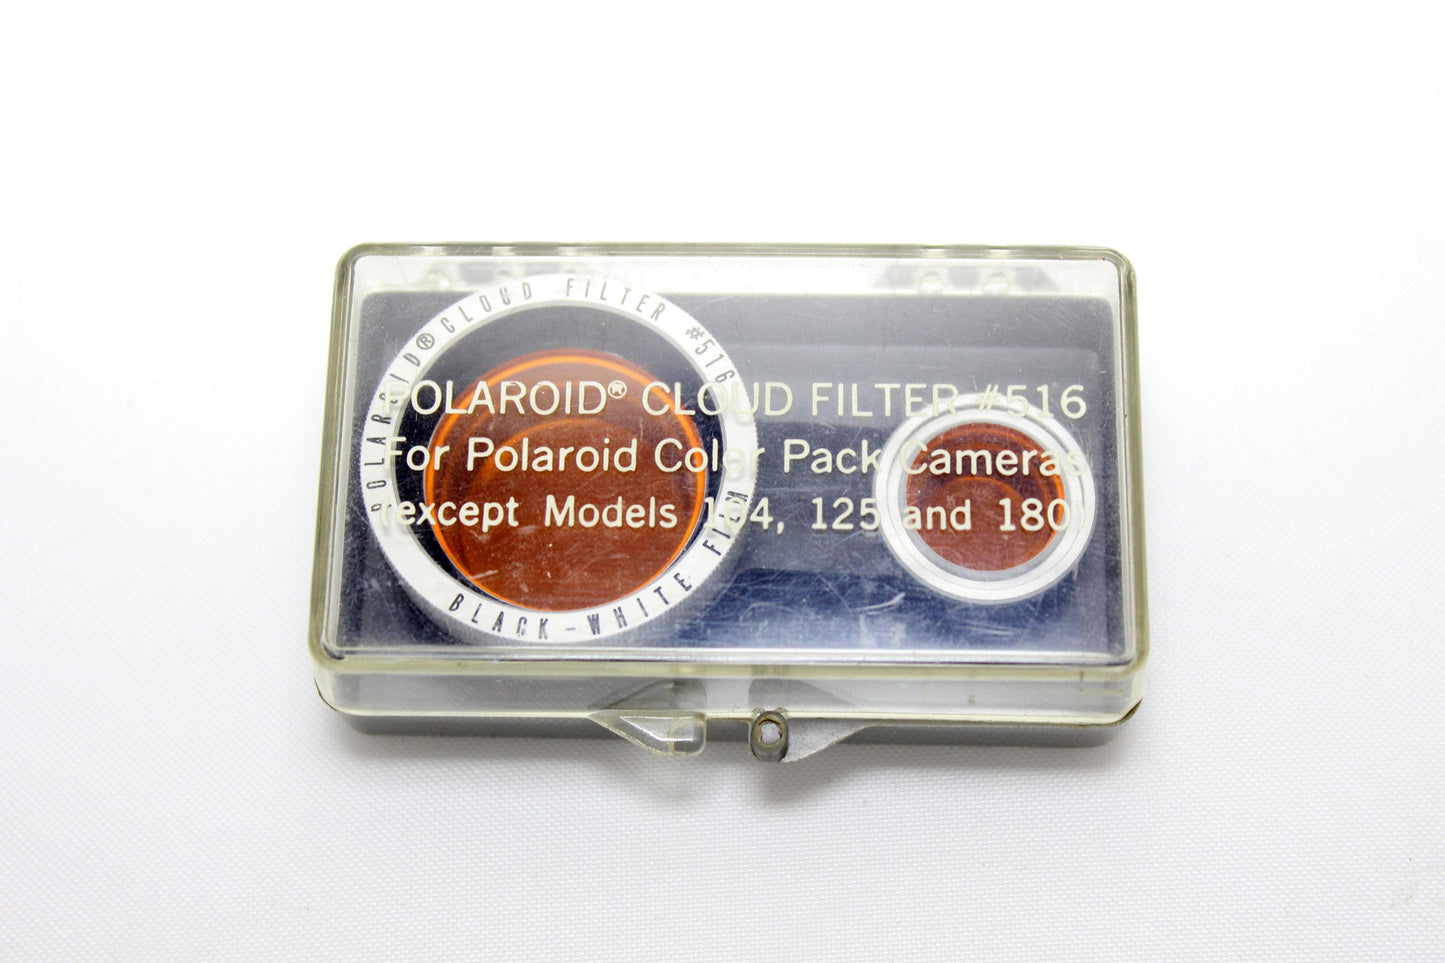 POLAROID Cloud filter #516 - for POLAROID Color Pack Cameras (except models 104, 125 and 180)